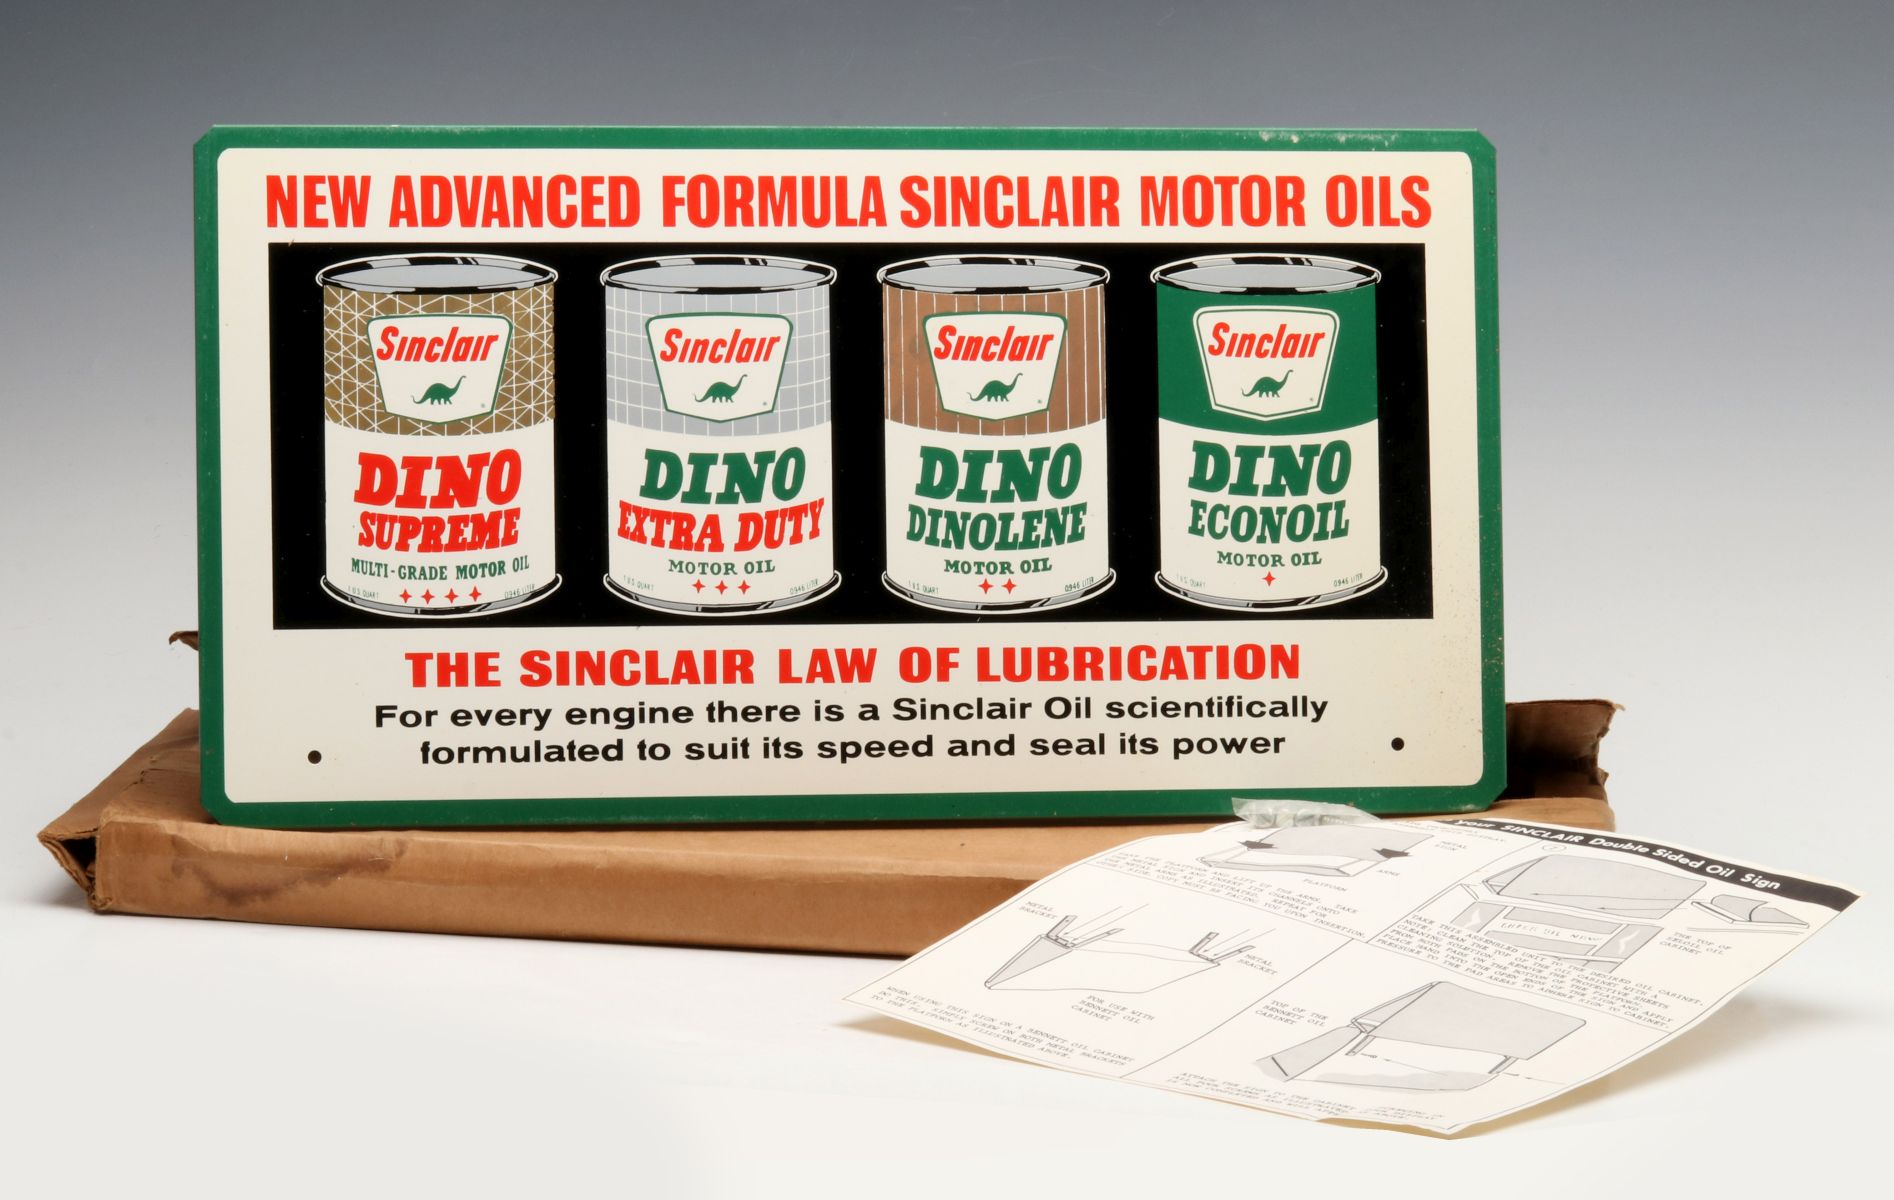 MINT IN BOX CABINET SIGNS FOR SINCLAIR MOTOR OILS